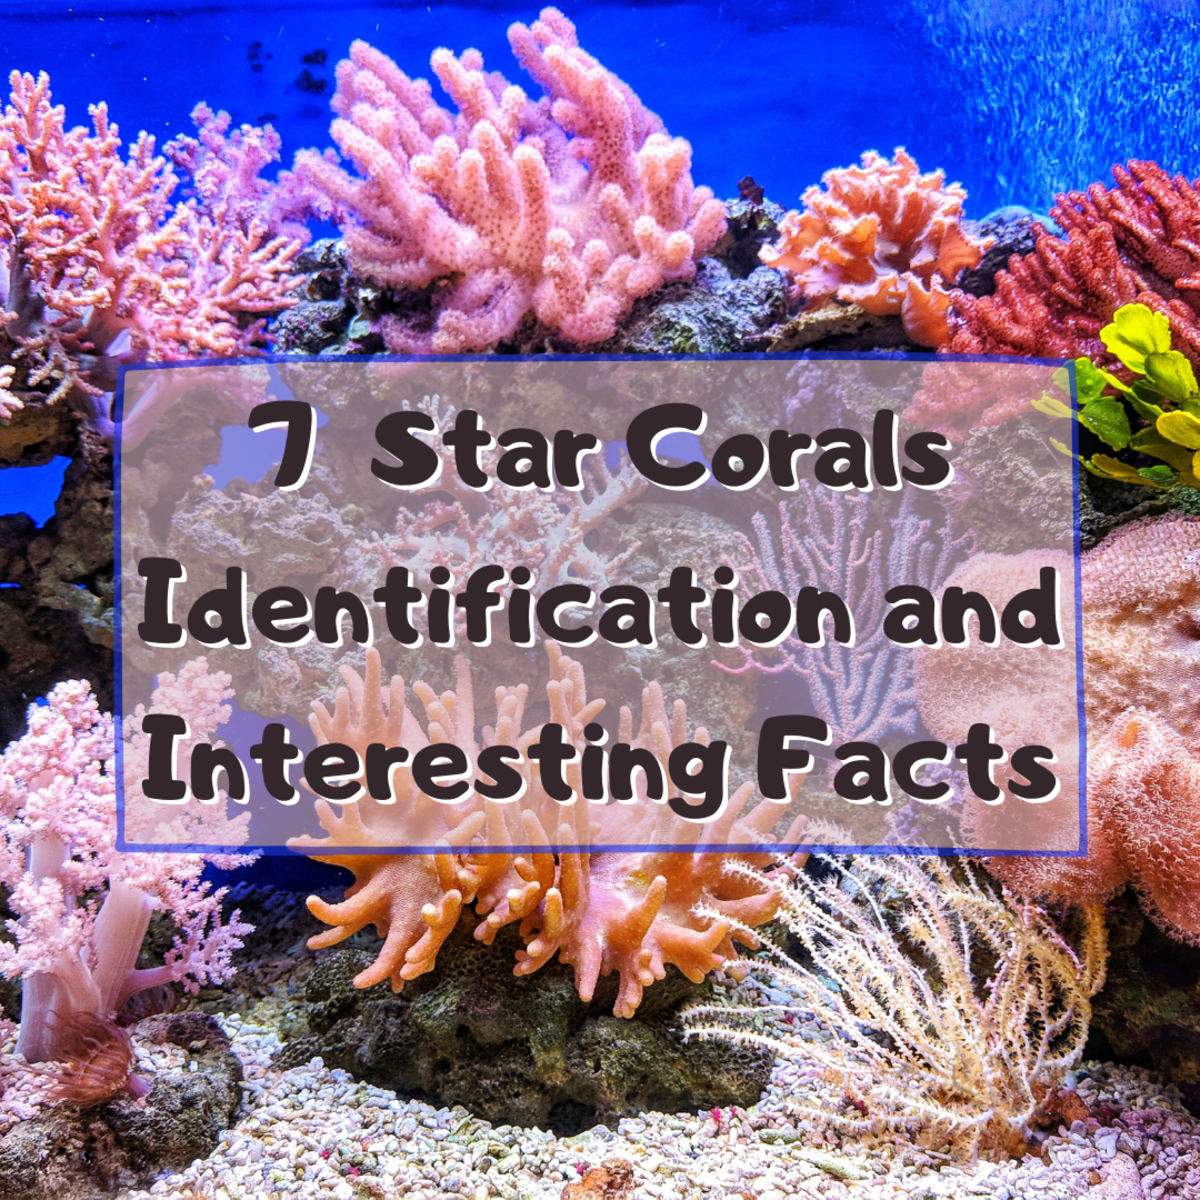 Read on to learn all about 7 Star Corals, including how to identify them and some interesting facts.